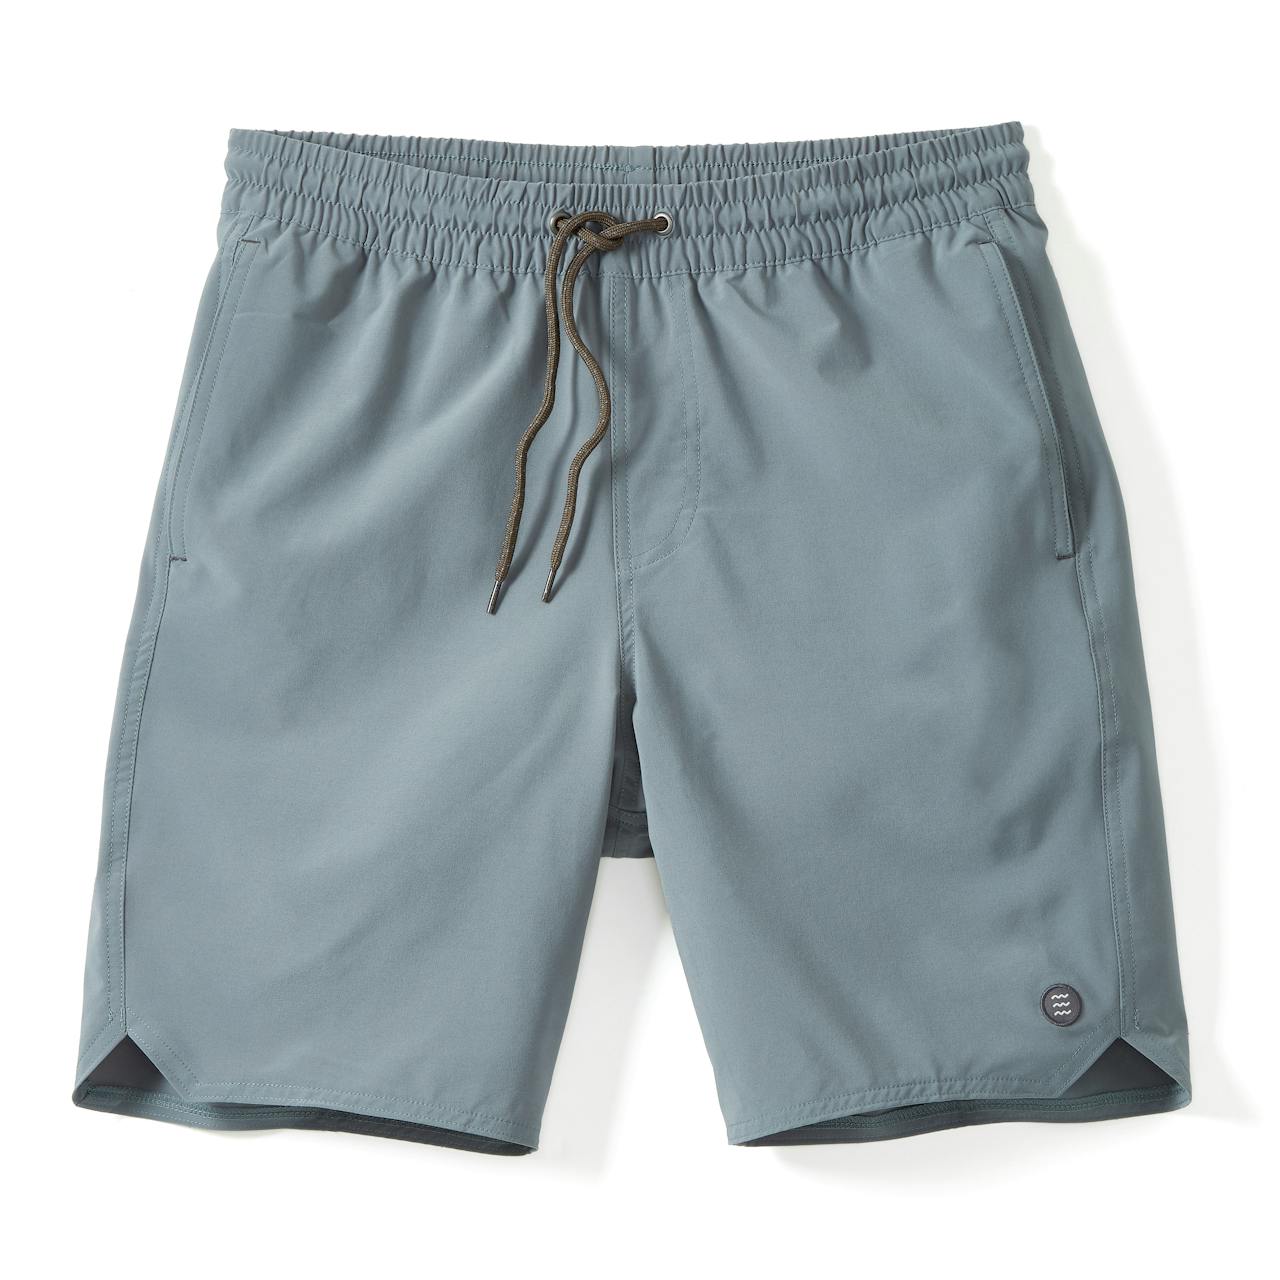 Free Fly Swell Hybrid Short - Lined 8"